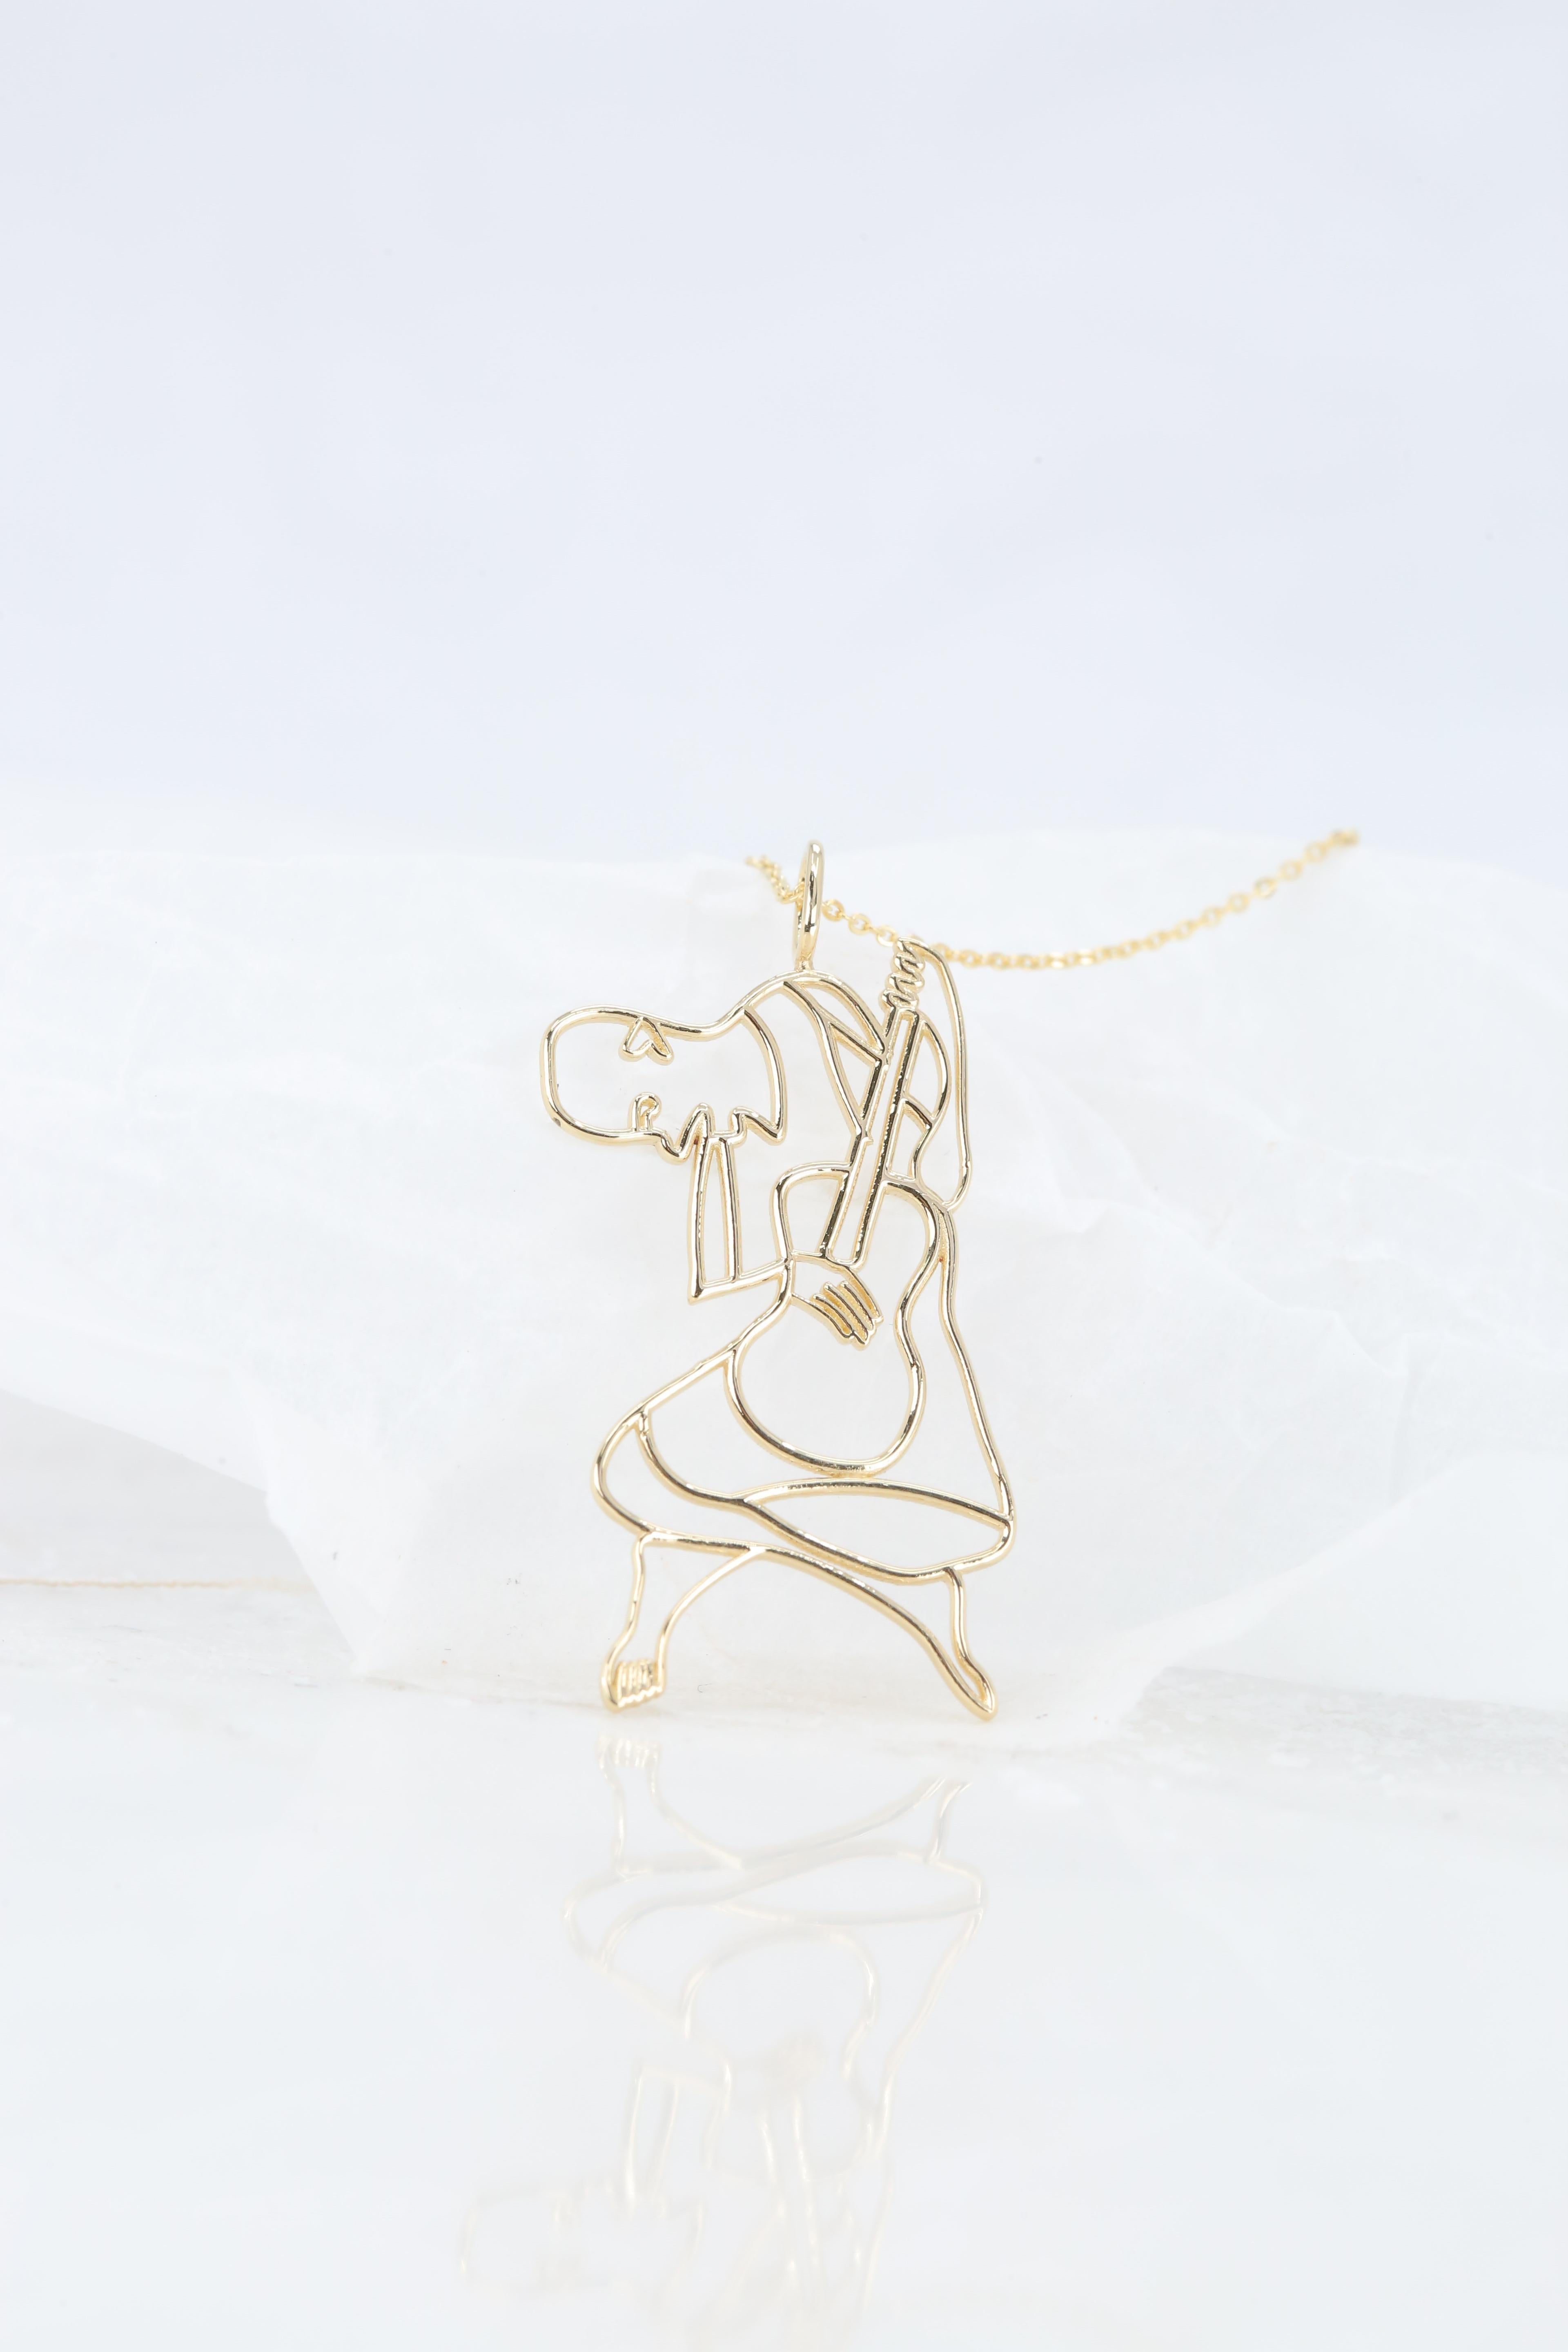 14K Gold Cubic Guitarist Necklace, Inspired by Picasso's 